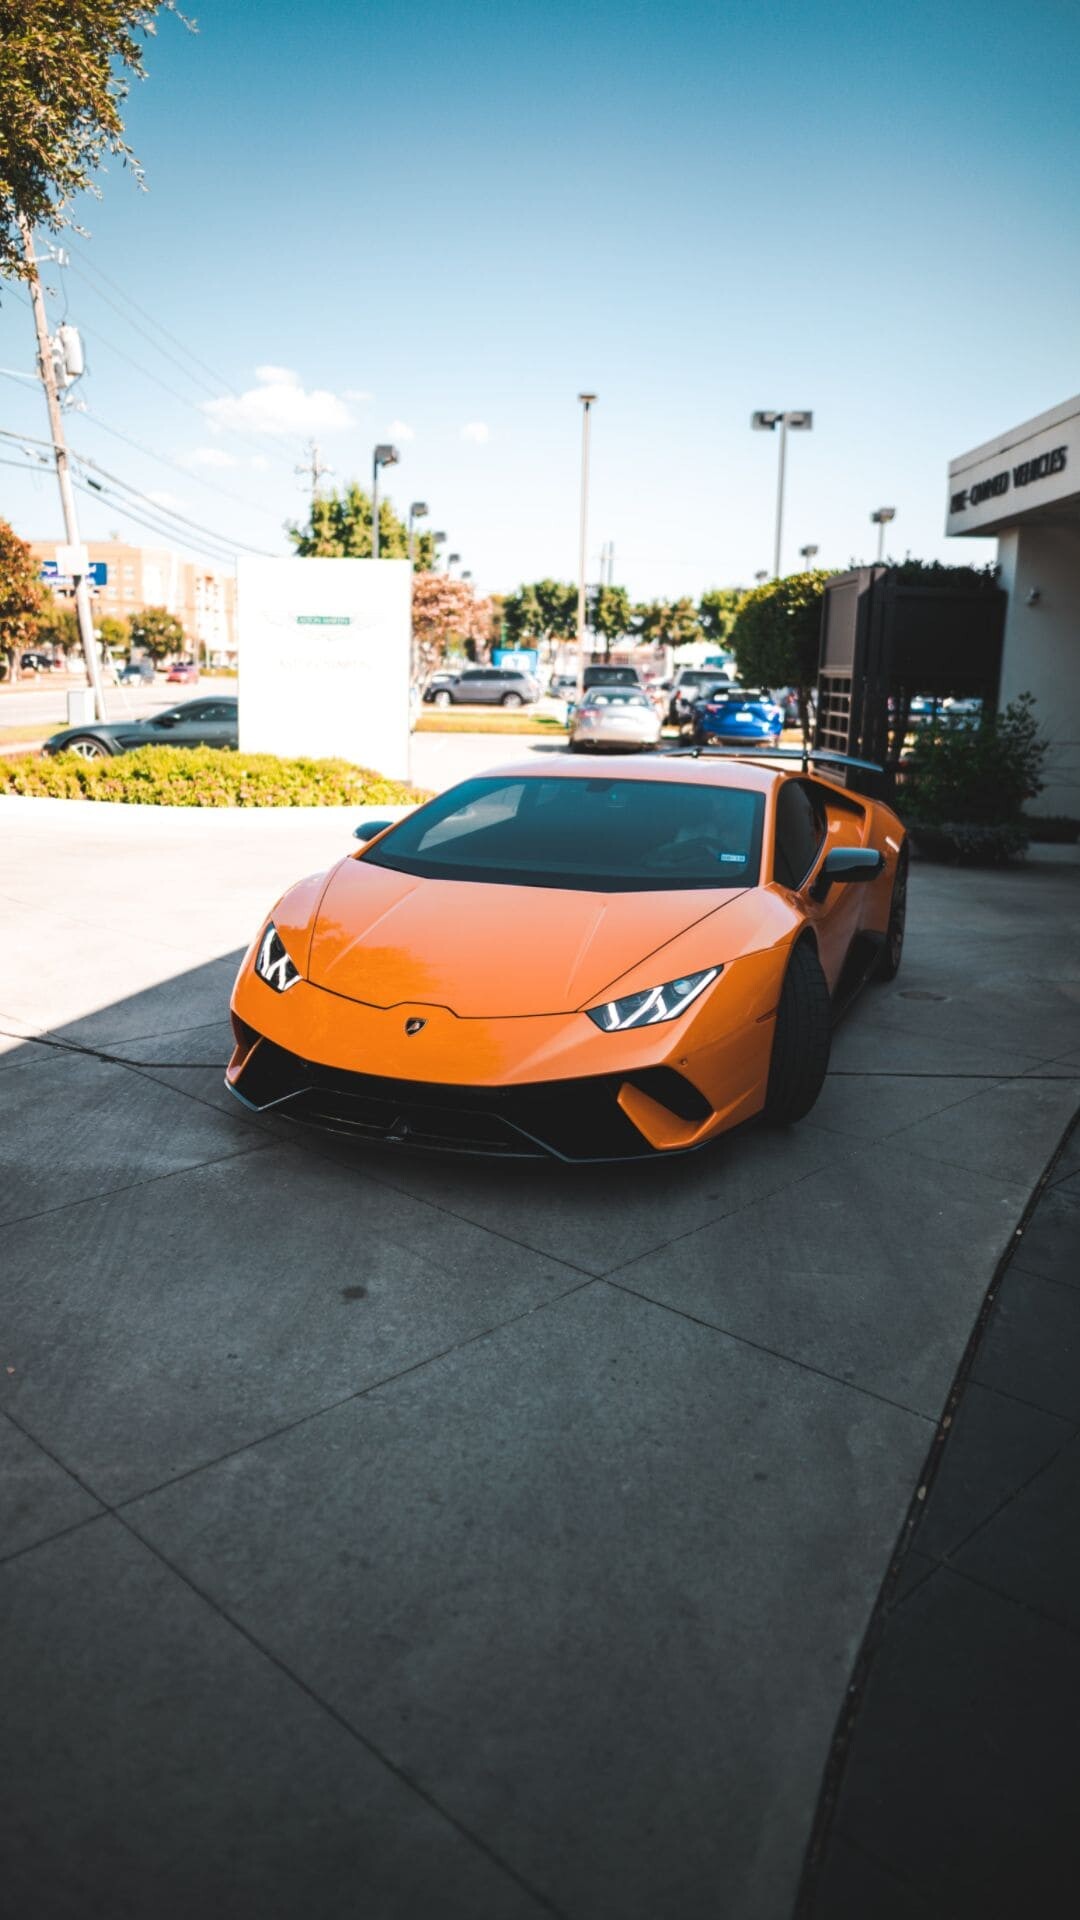 Lamborghini: The Italian car manufacturer, was officially incorporated on 30 October 1963, Huracan. 1080x1920 Full HD Background.